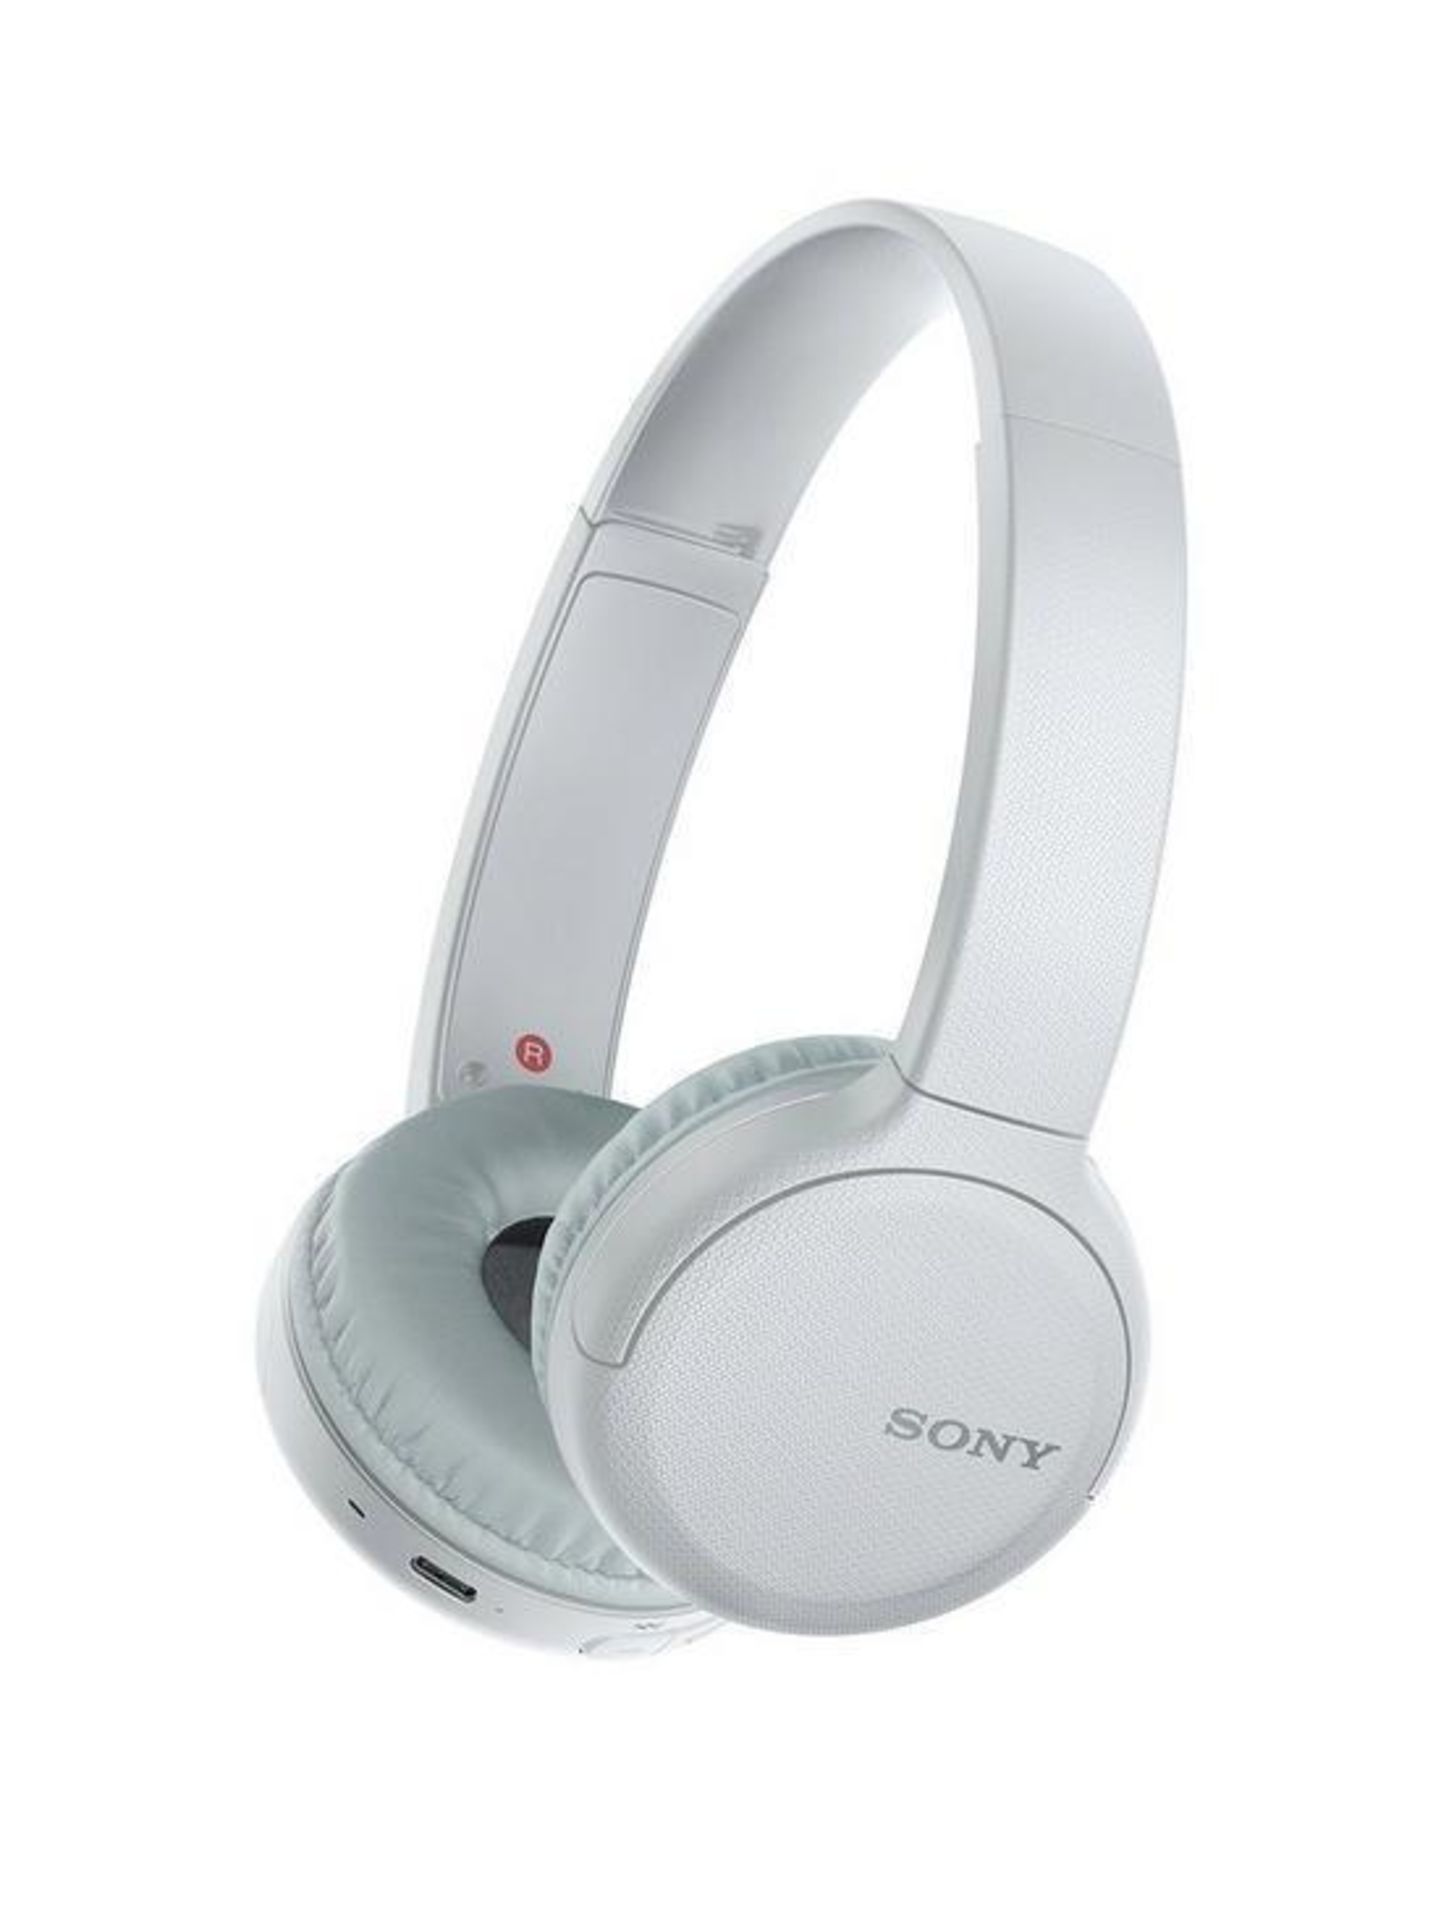 Sony wh-ch510 wireless with voice assistant headphones [white] 0x0x0cm rrp: £76.0 - Image 2 of 2